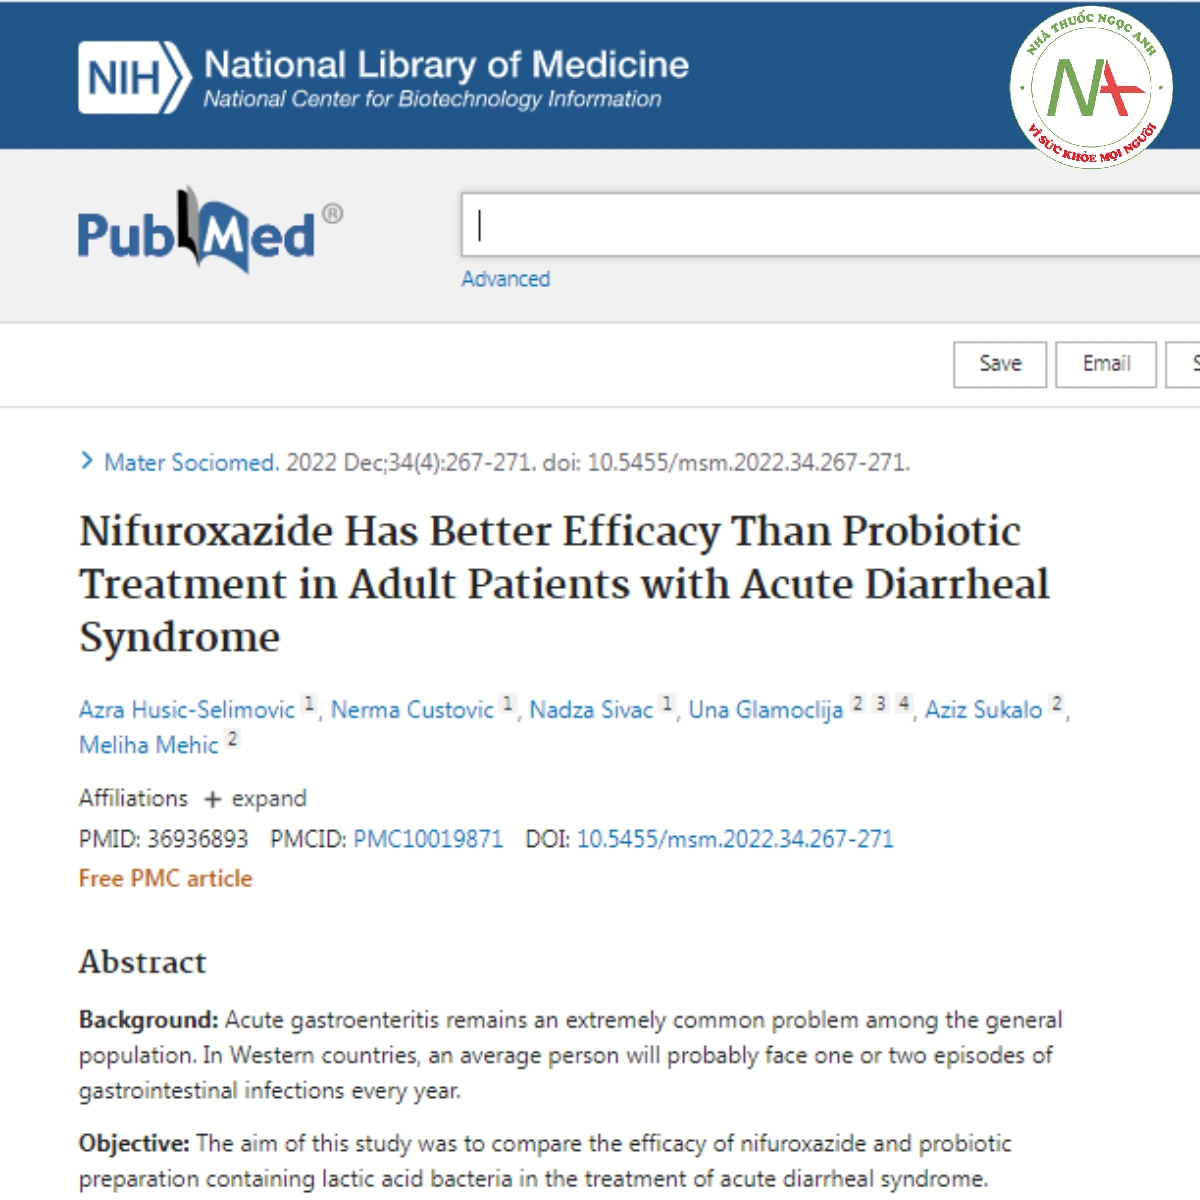 Nifuroxazide Has Better Efficacy Than Probiotic Treatment in Adult Patients with Acute Diarrheal Syndrome